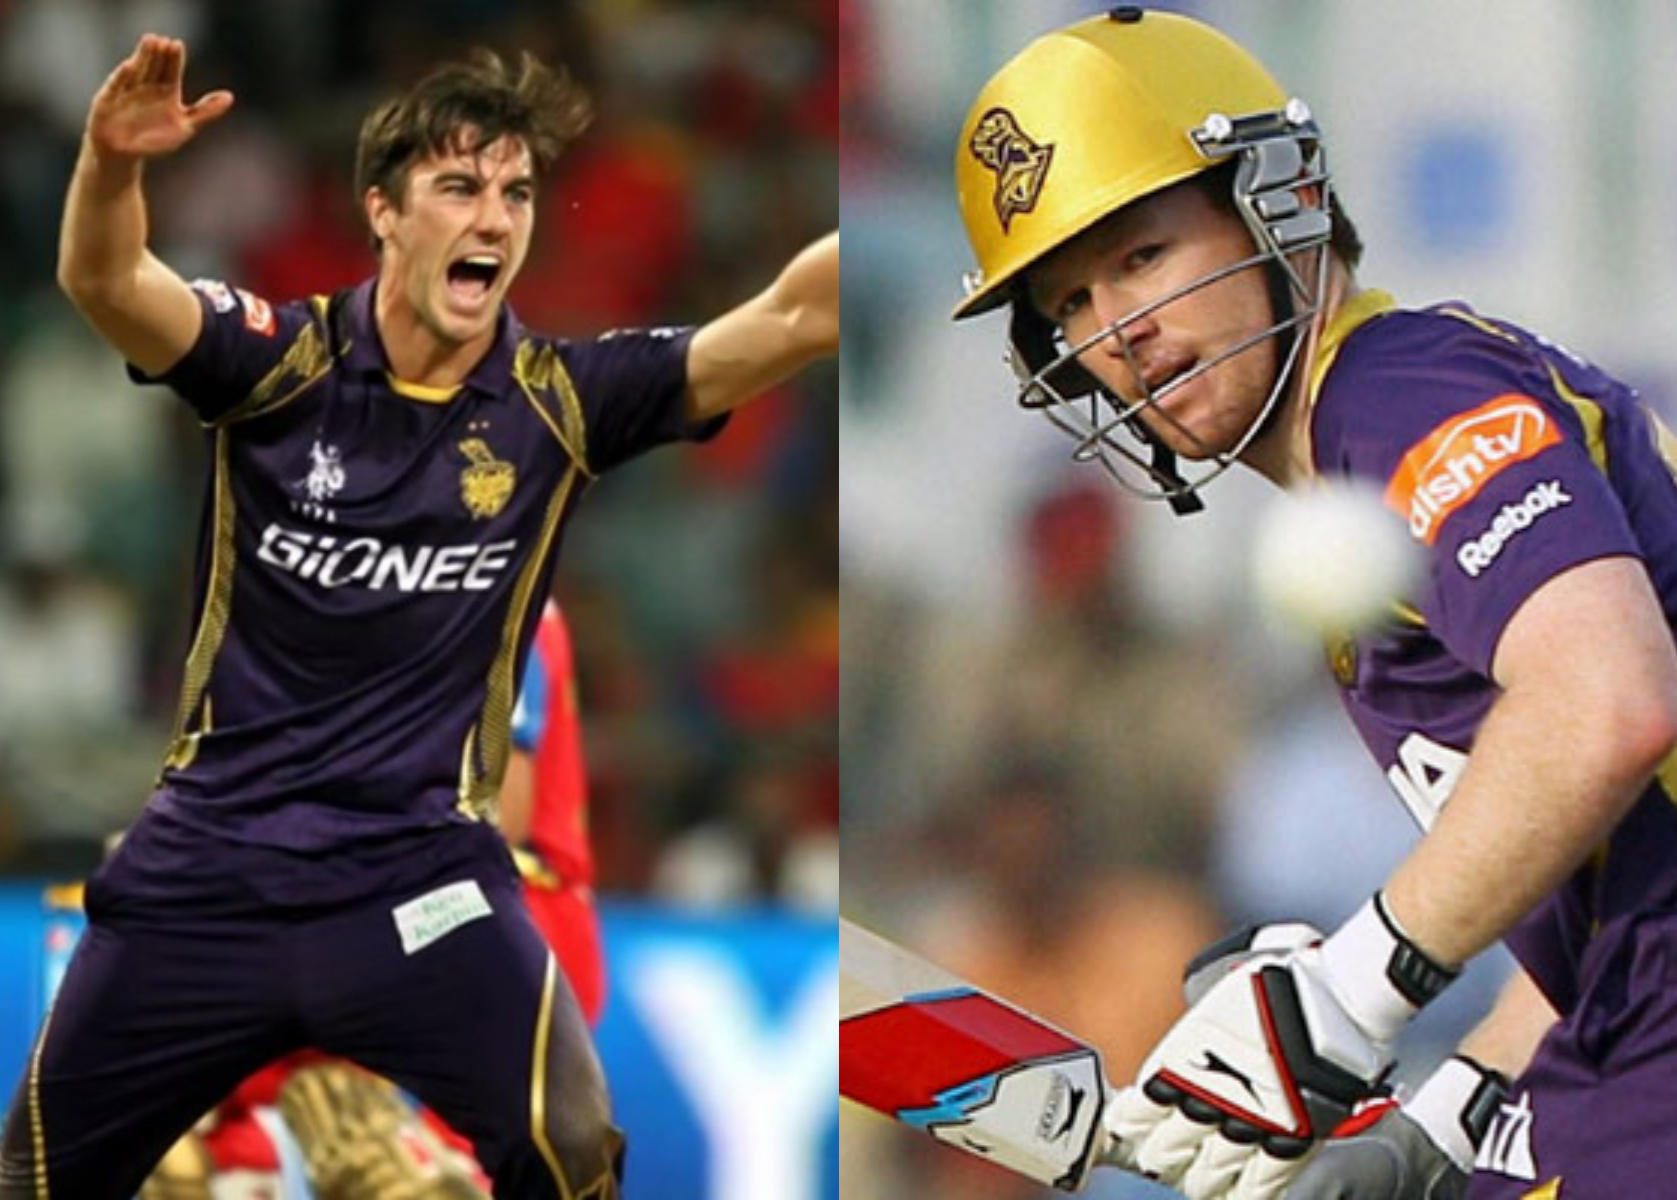 Karthik was excited to have Pat Cummins and Eoin Morgan in his ranks for IPL 2020